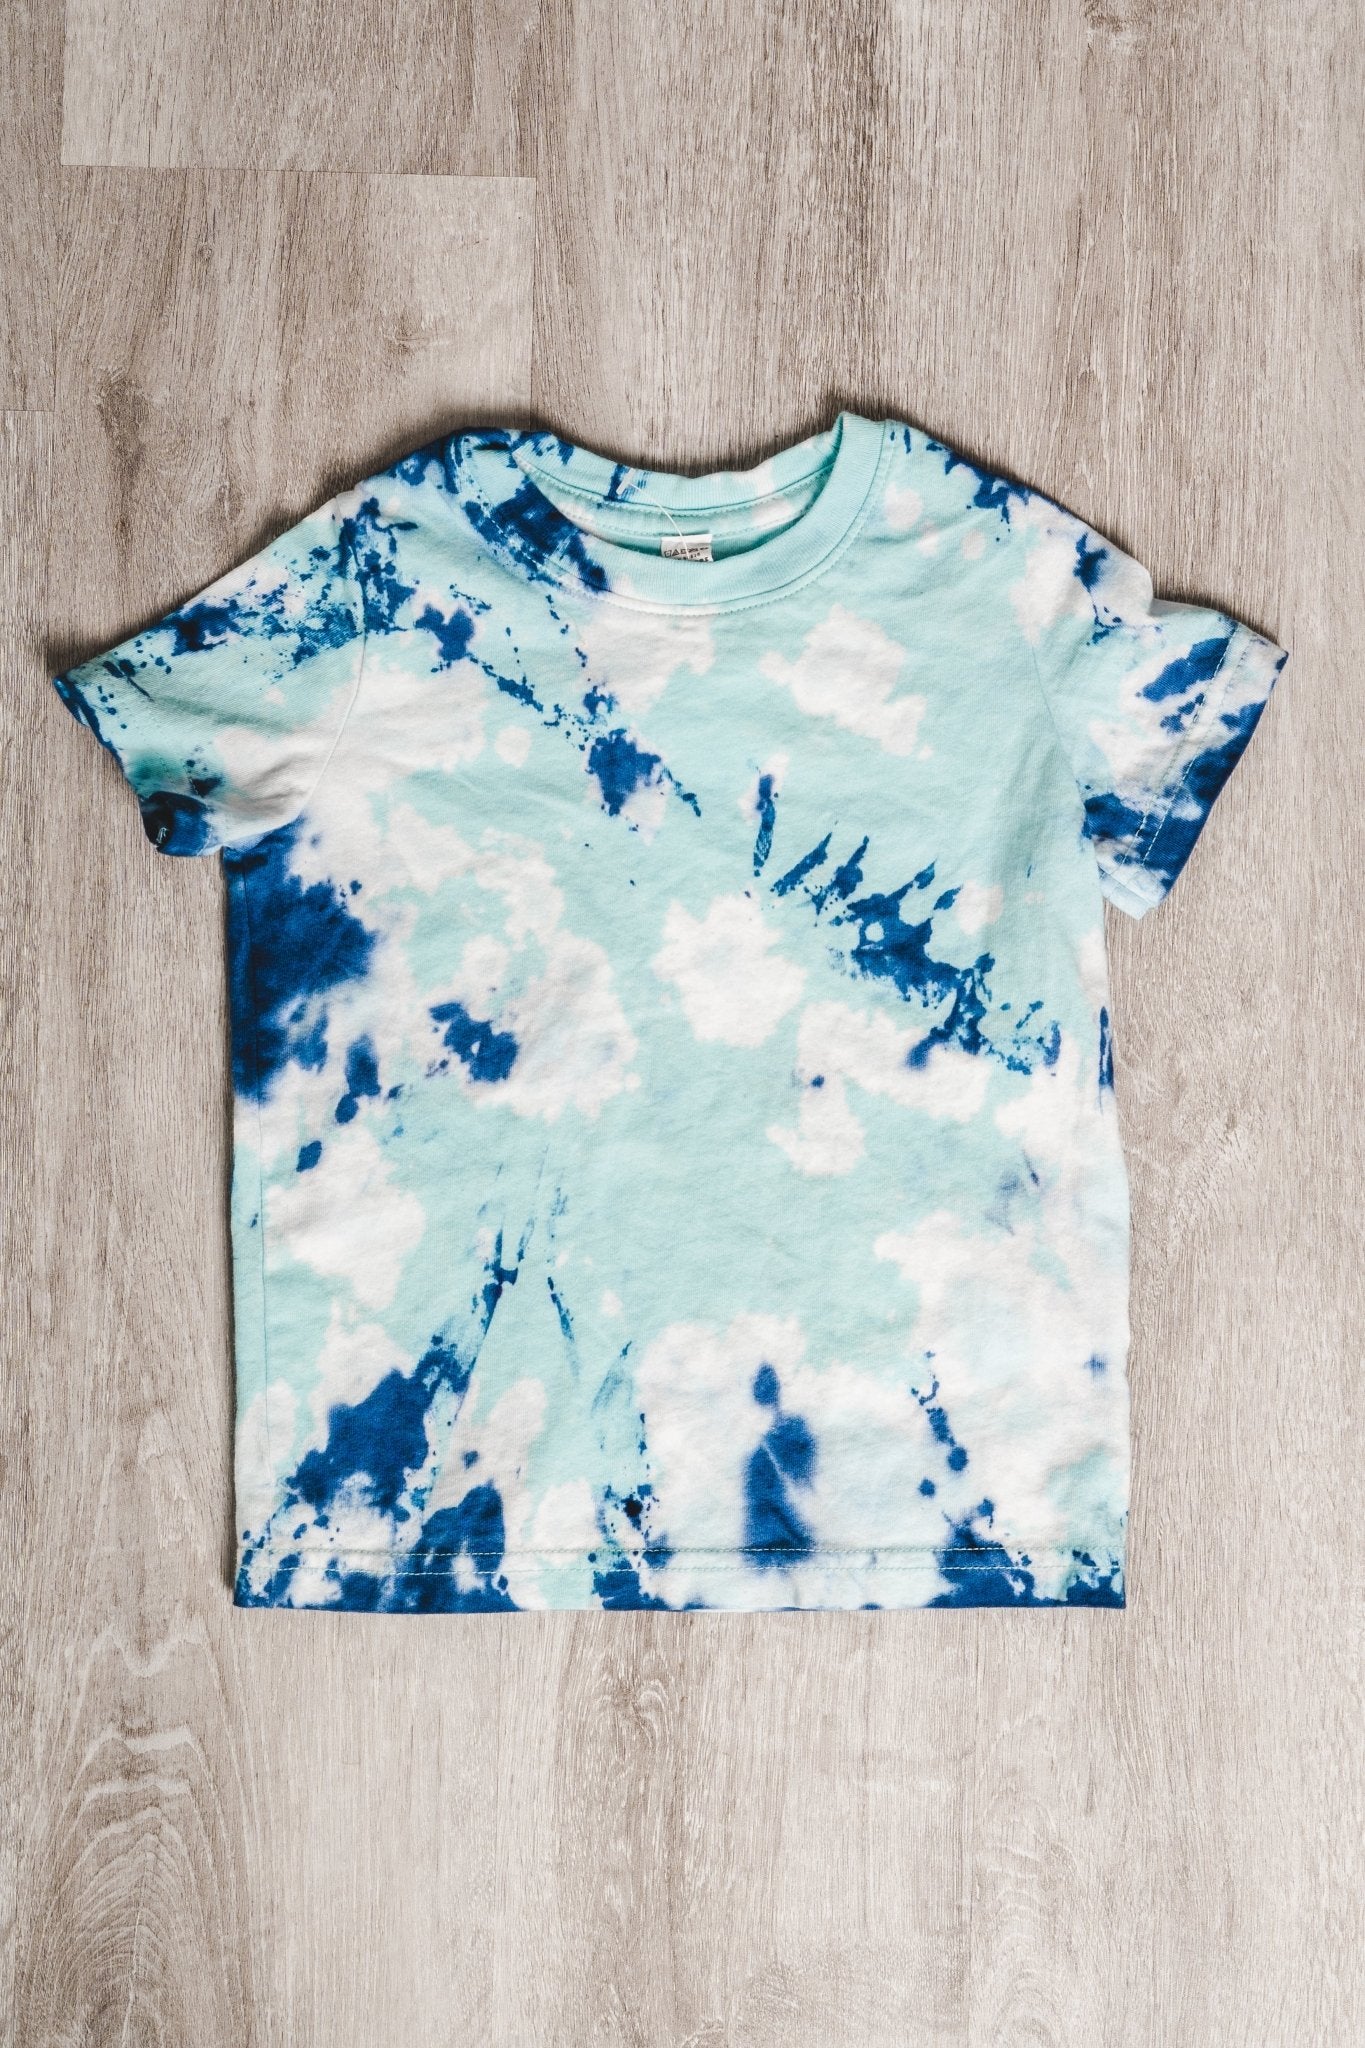 KIDS reverse and navy tie dye tee mint - Tie Dye tshirt - Tie Dye Clothing at Lush Fashion Lounge Trendy Boutique in Oklahoma City